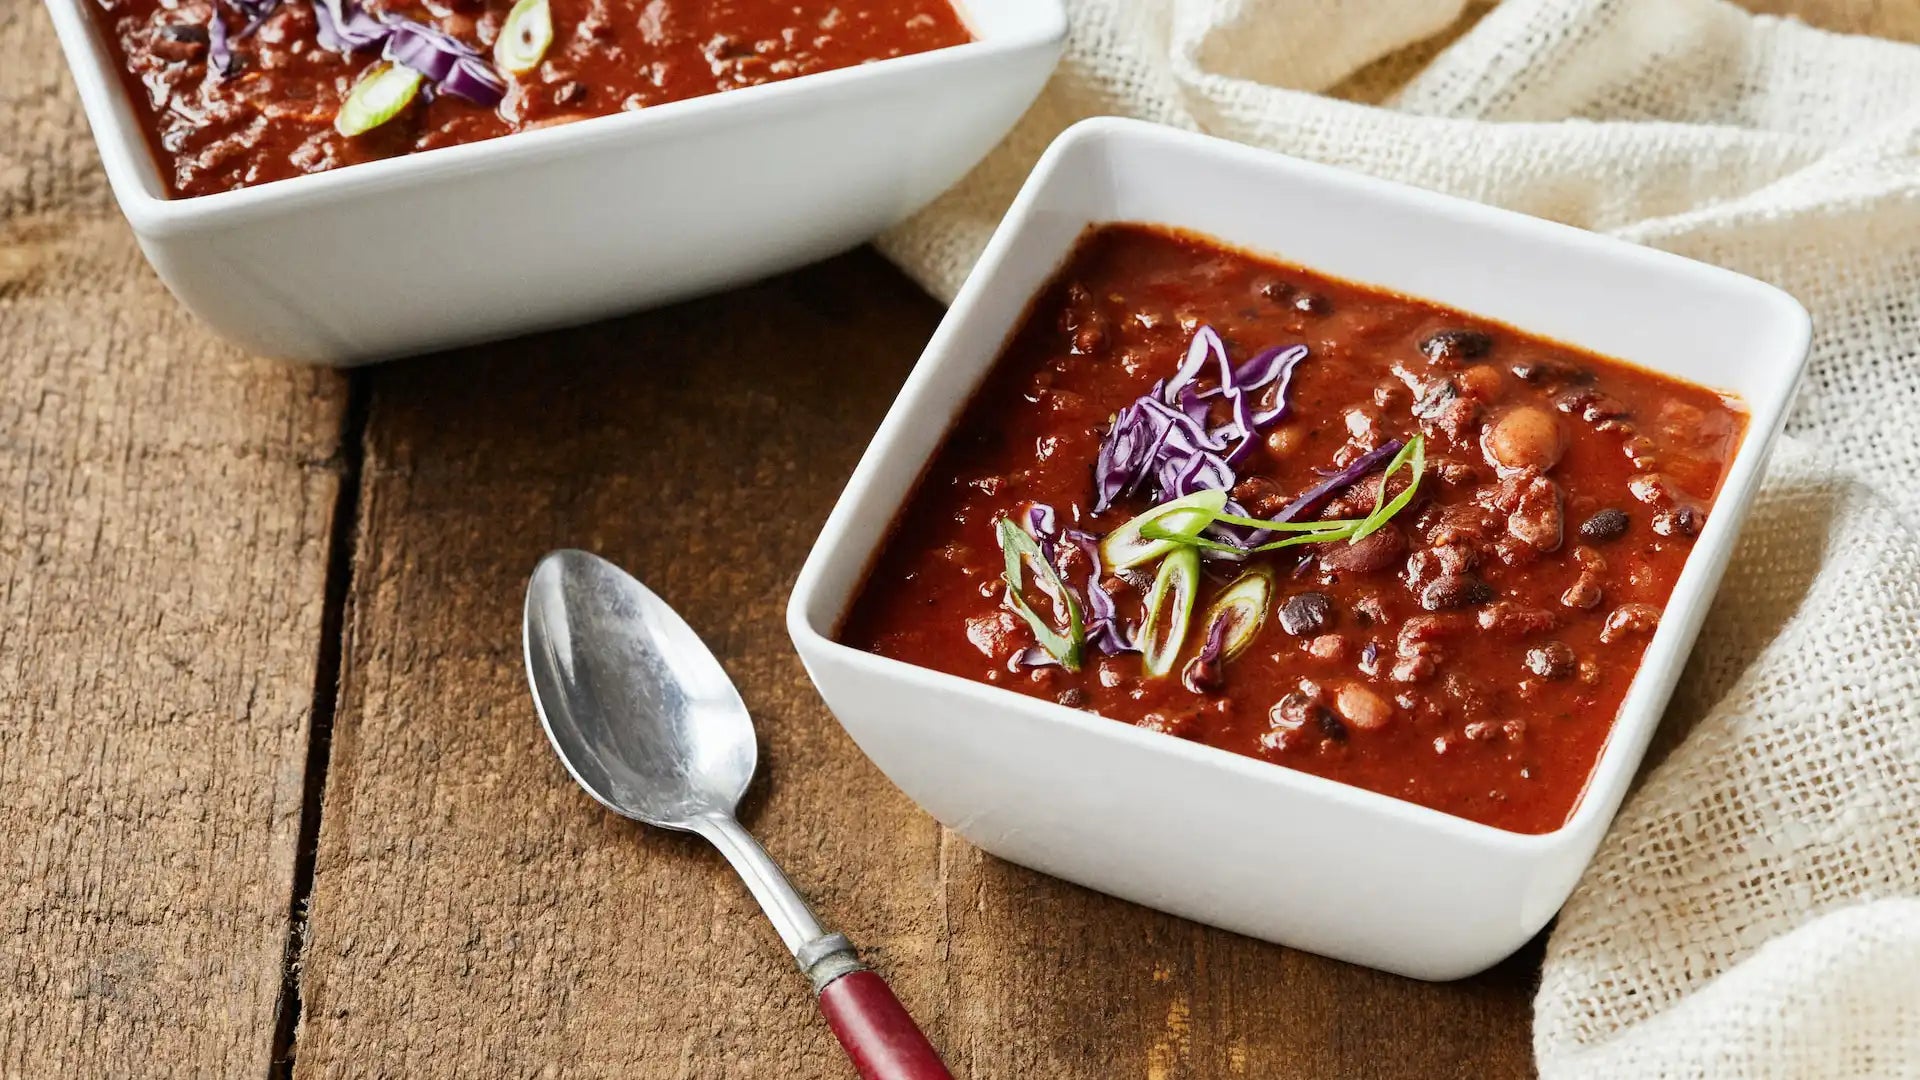 Hosting a Chili Cook Off: Chili Cook Off Prize Ideas, Themes, Awards + More